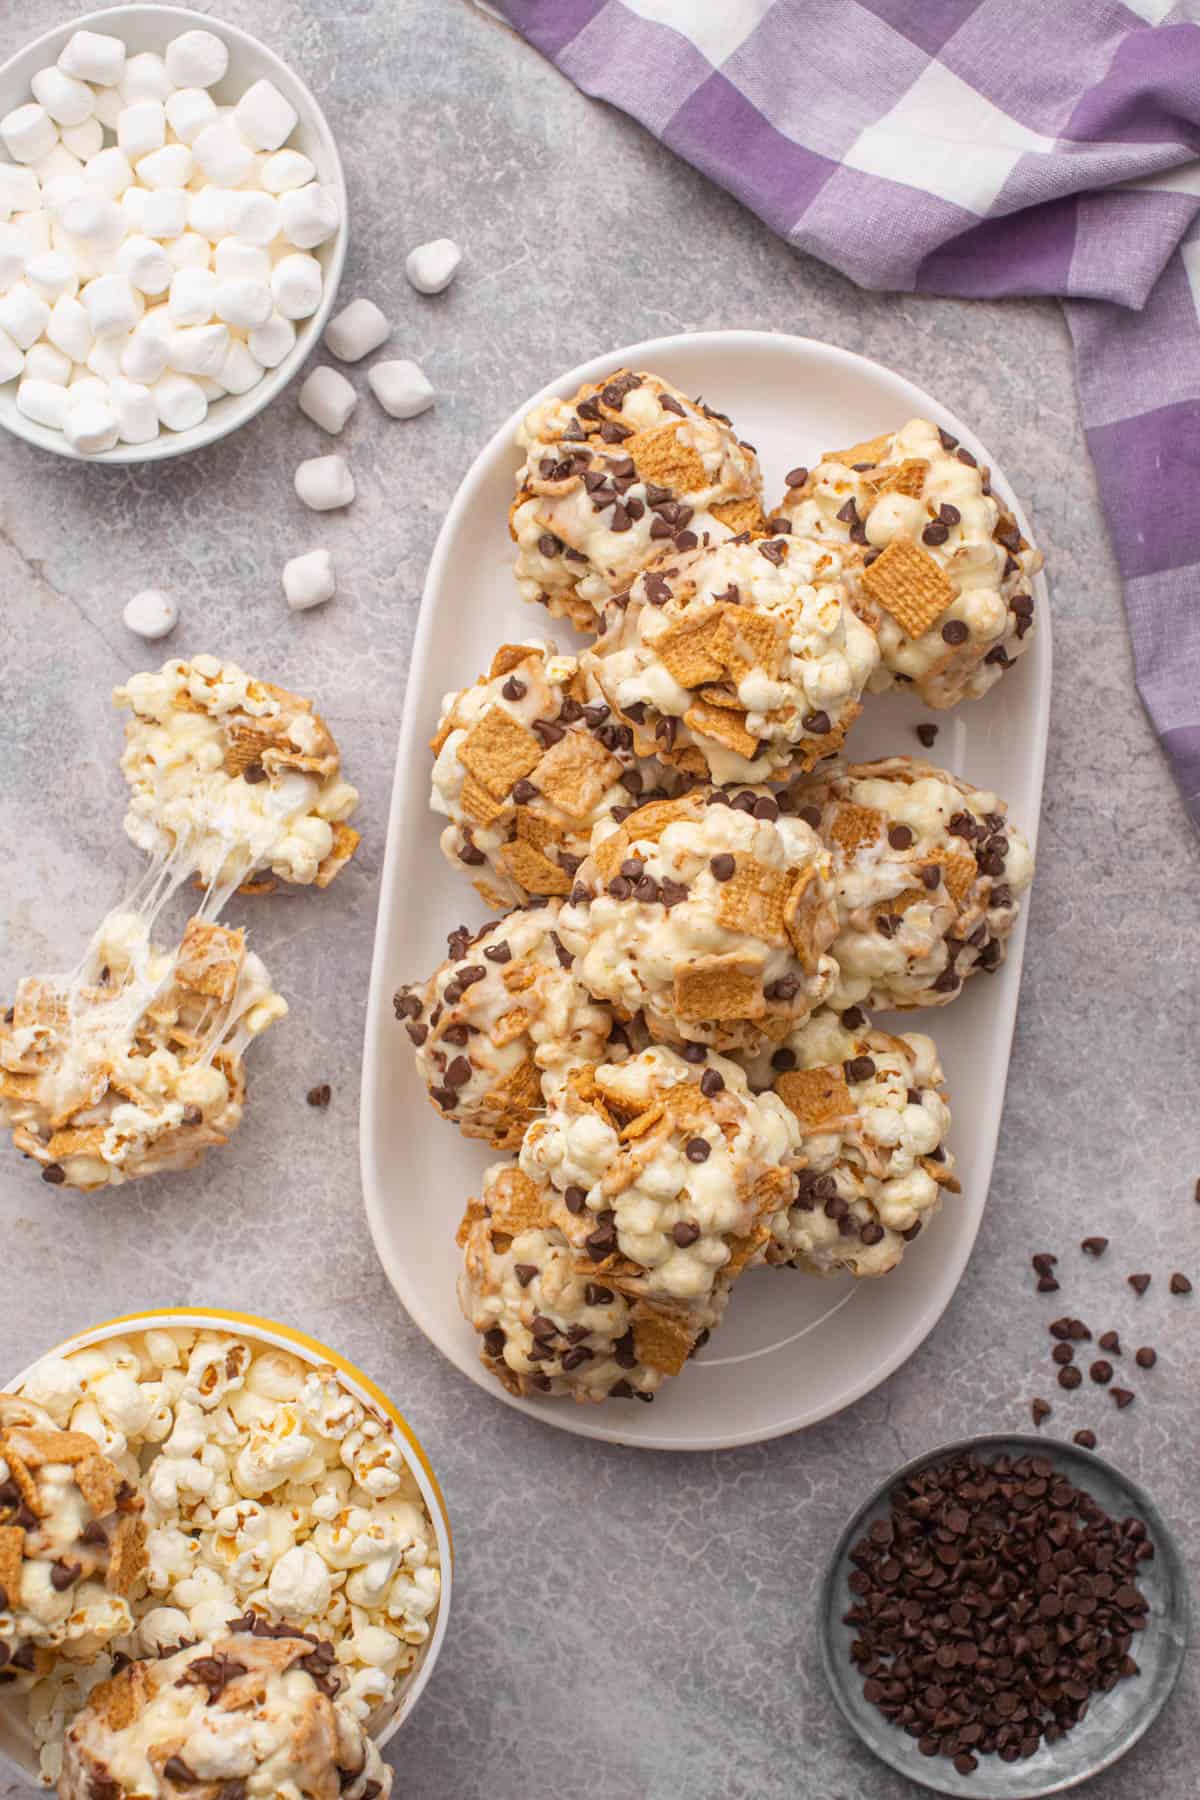 An overhead image of popcorn balls with chocolate chips and Golden Grahams cereal on a serving platter.